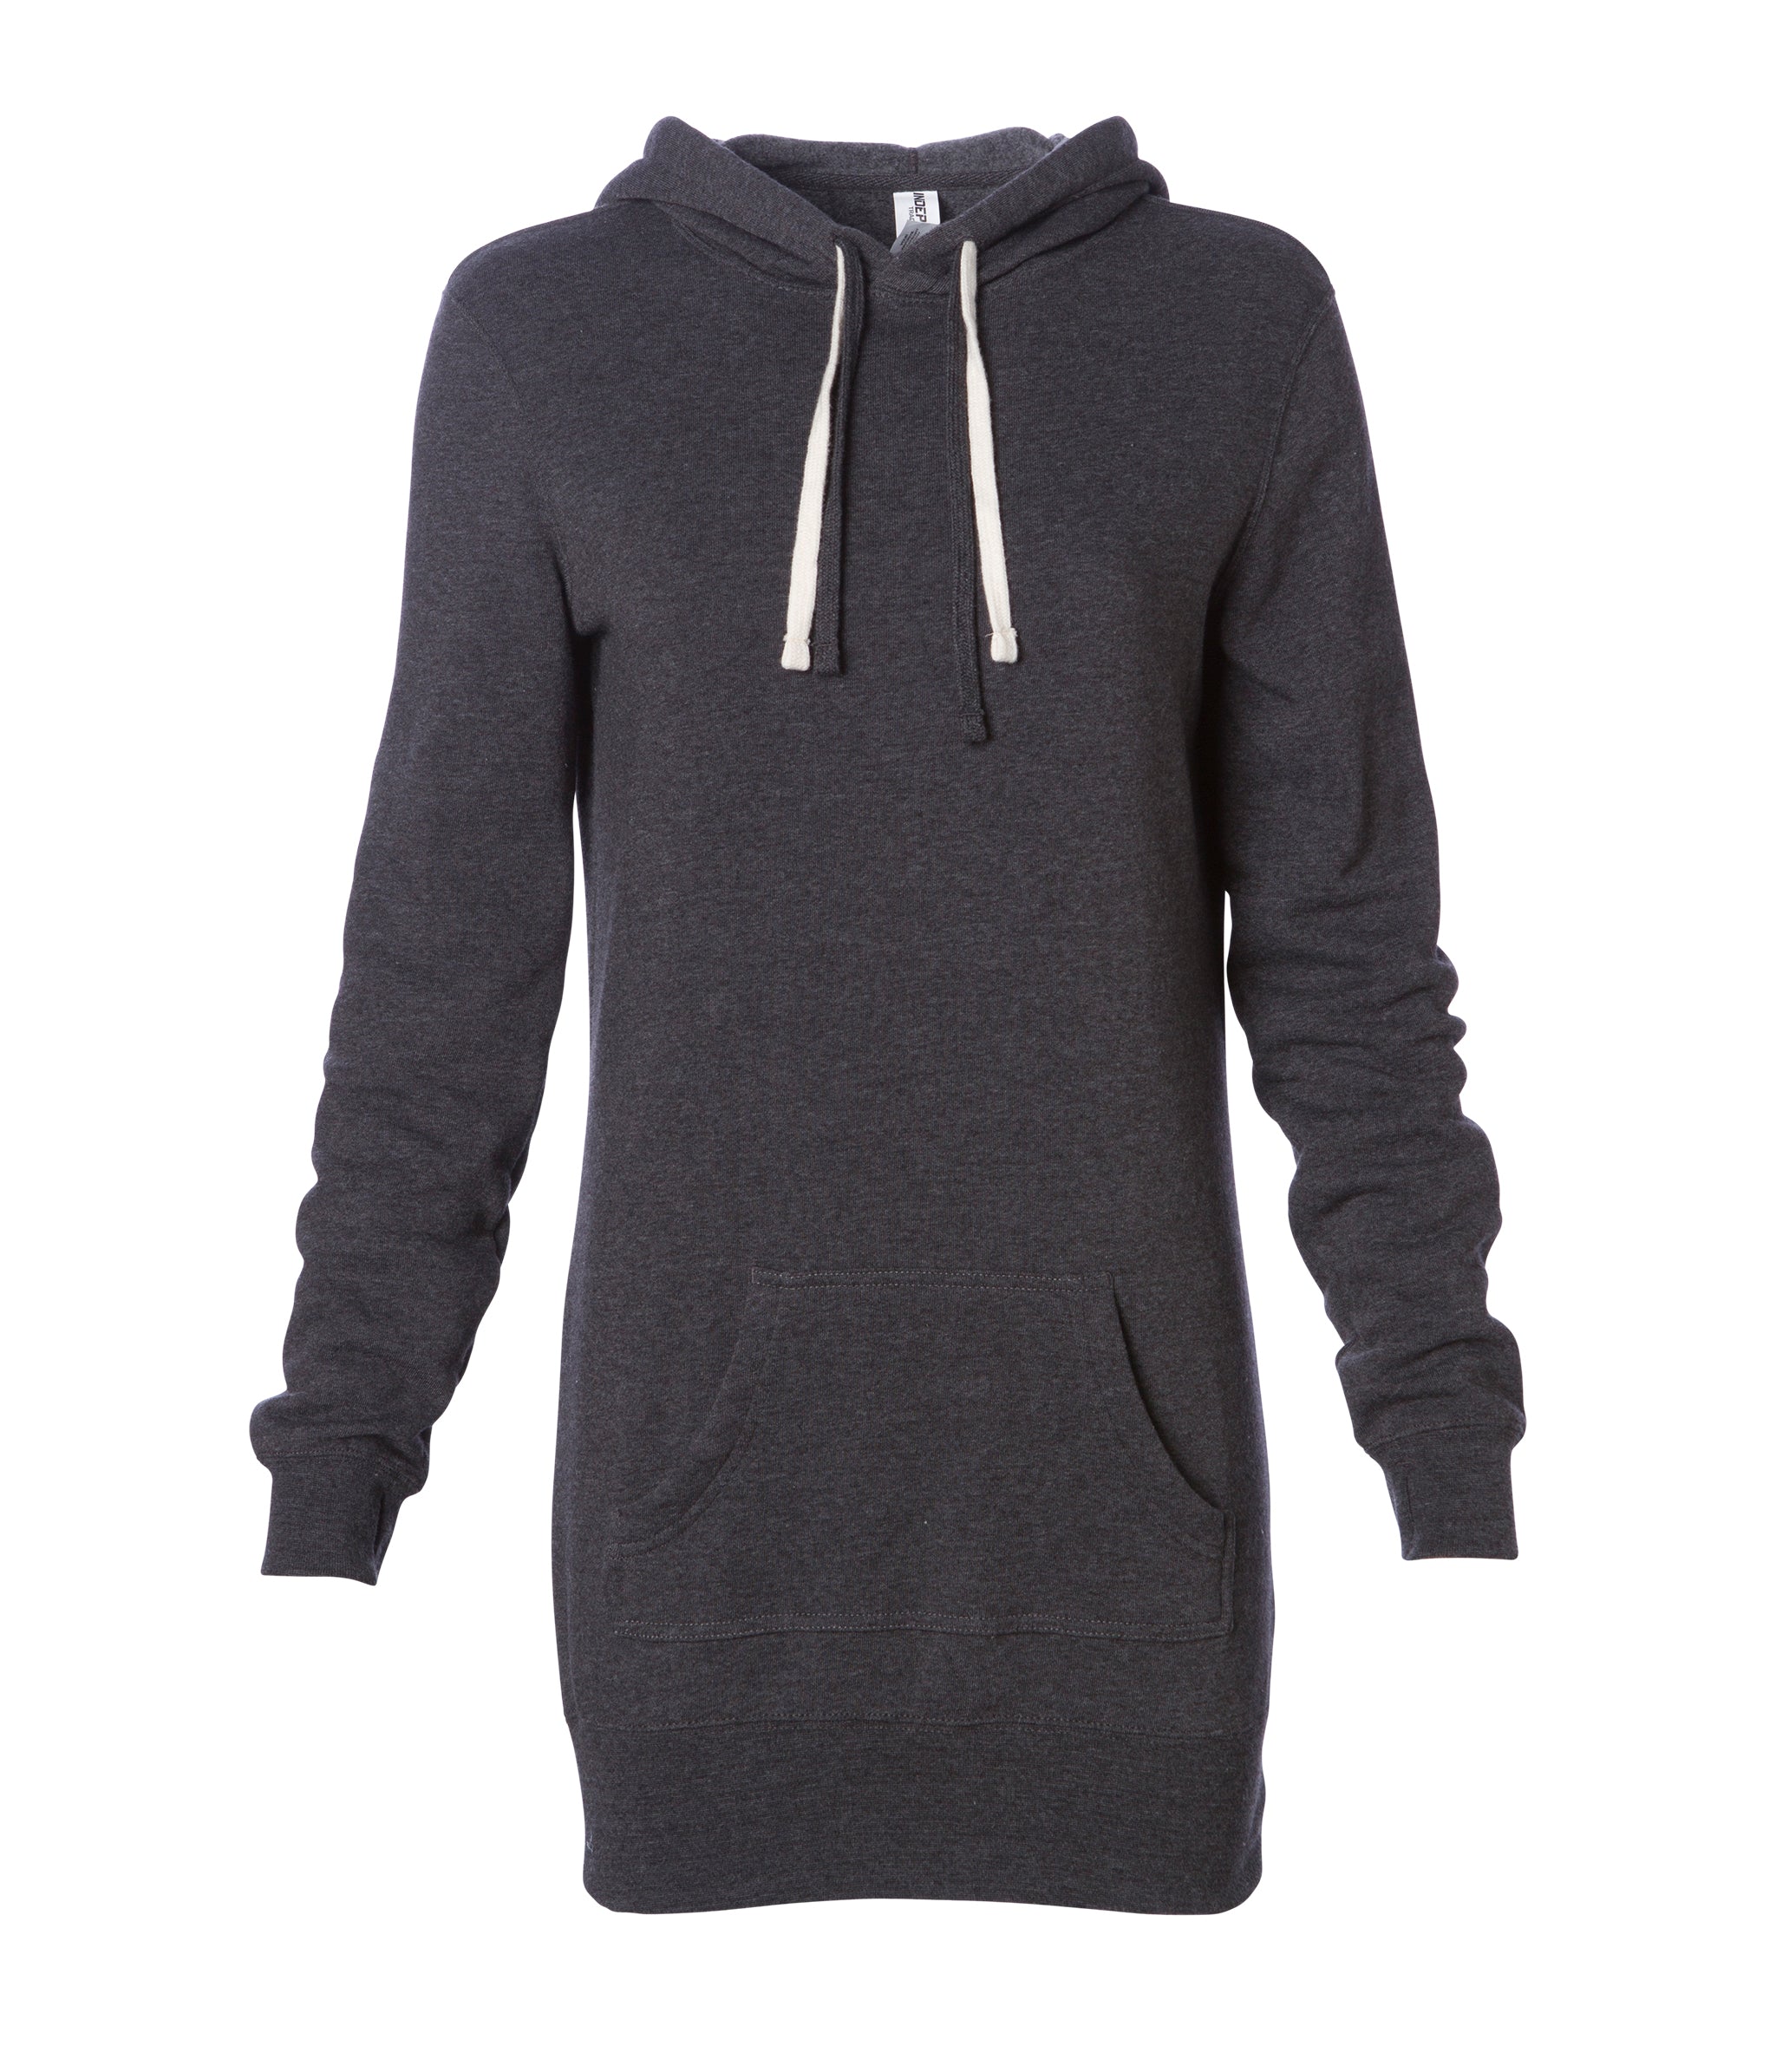 Womens Pullover Hooded Sweatshirt Dress | Independent Trading Company